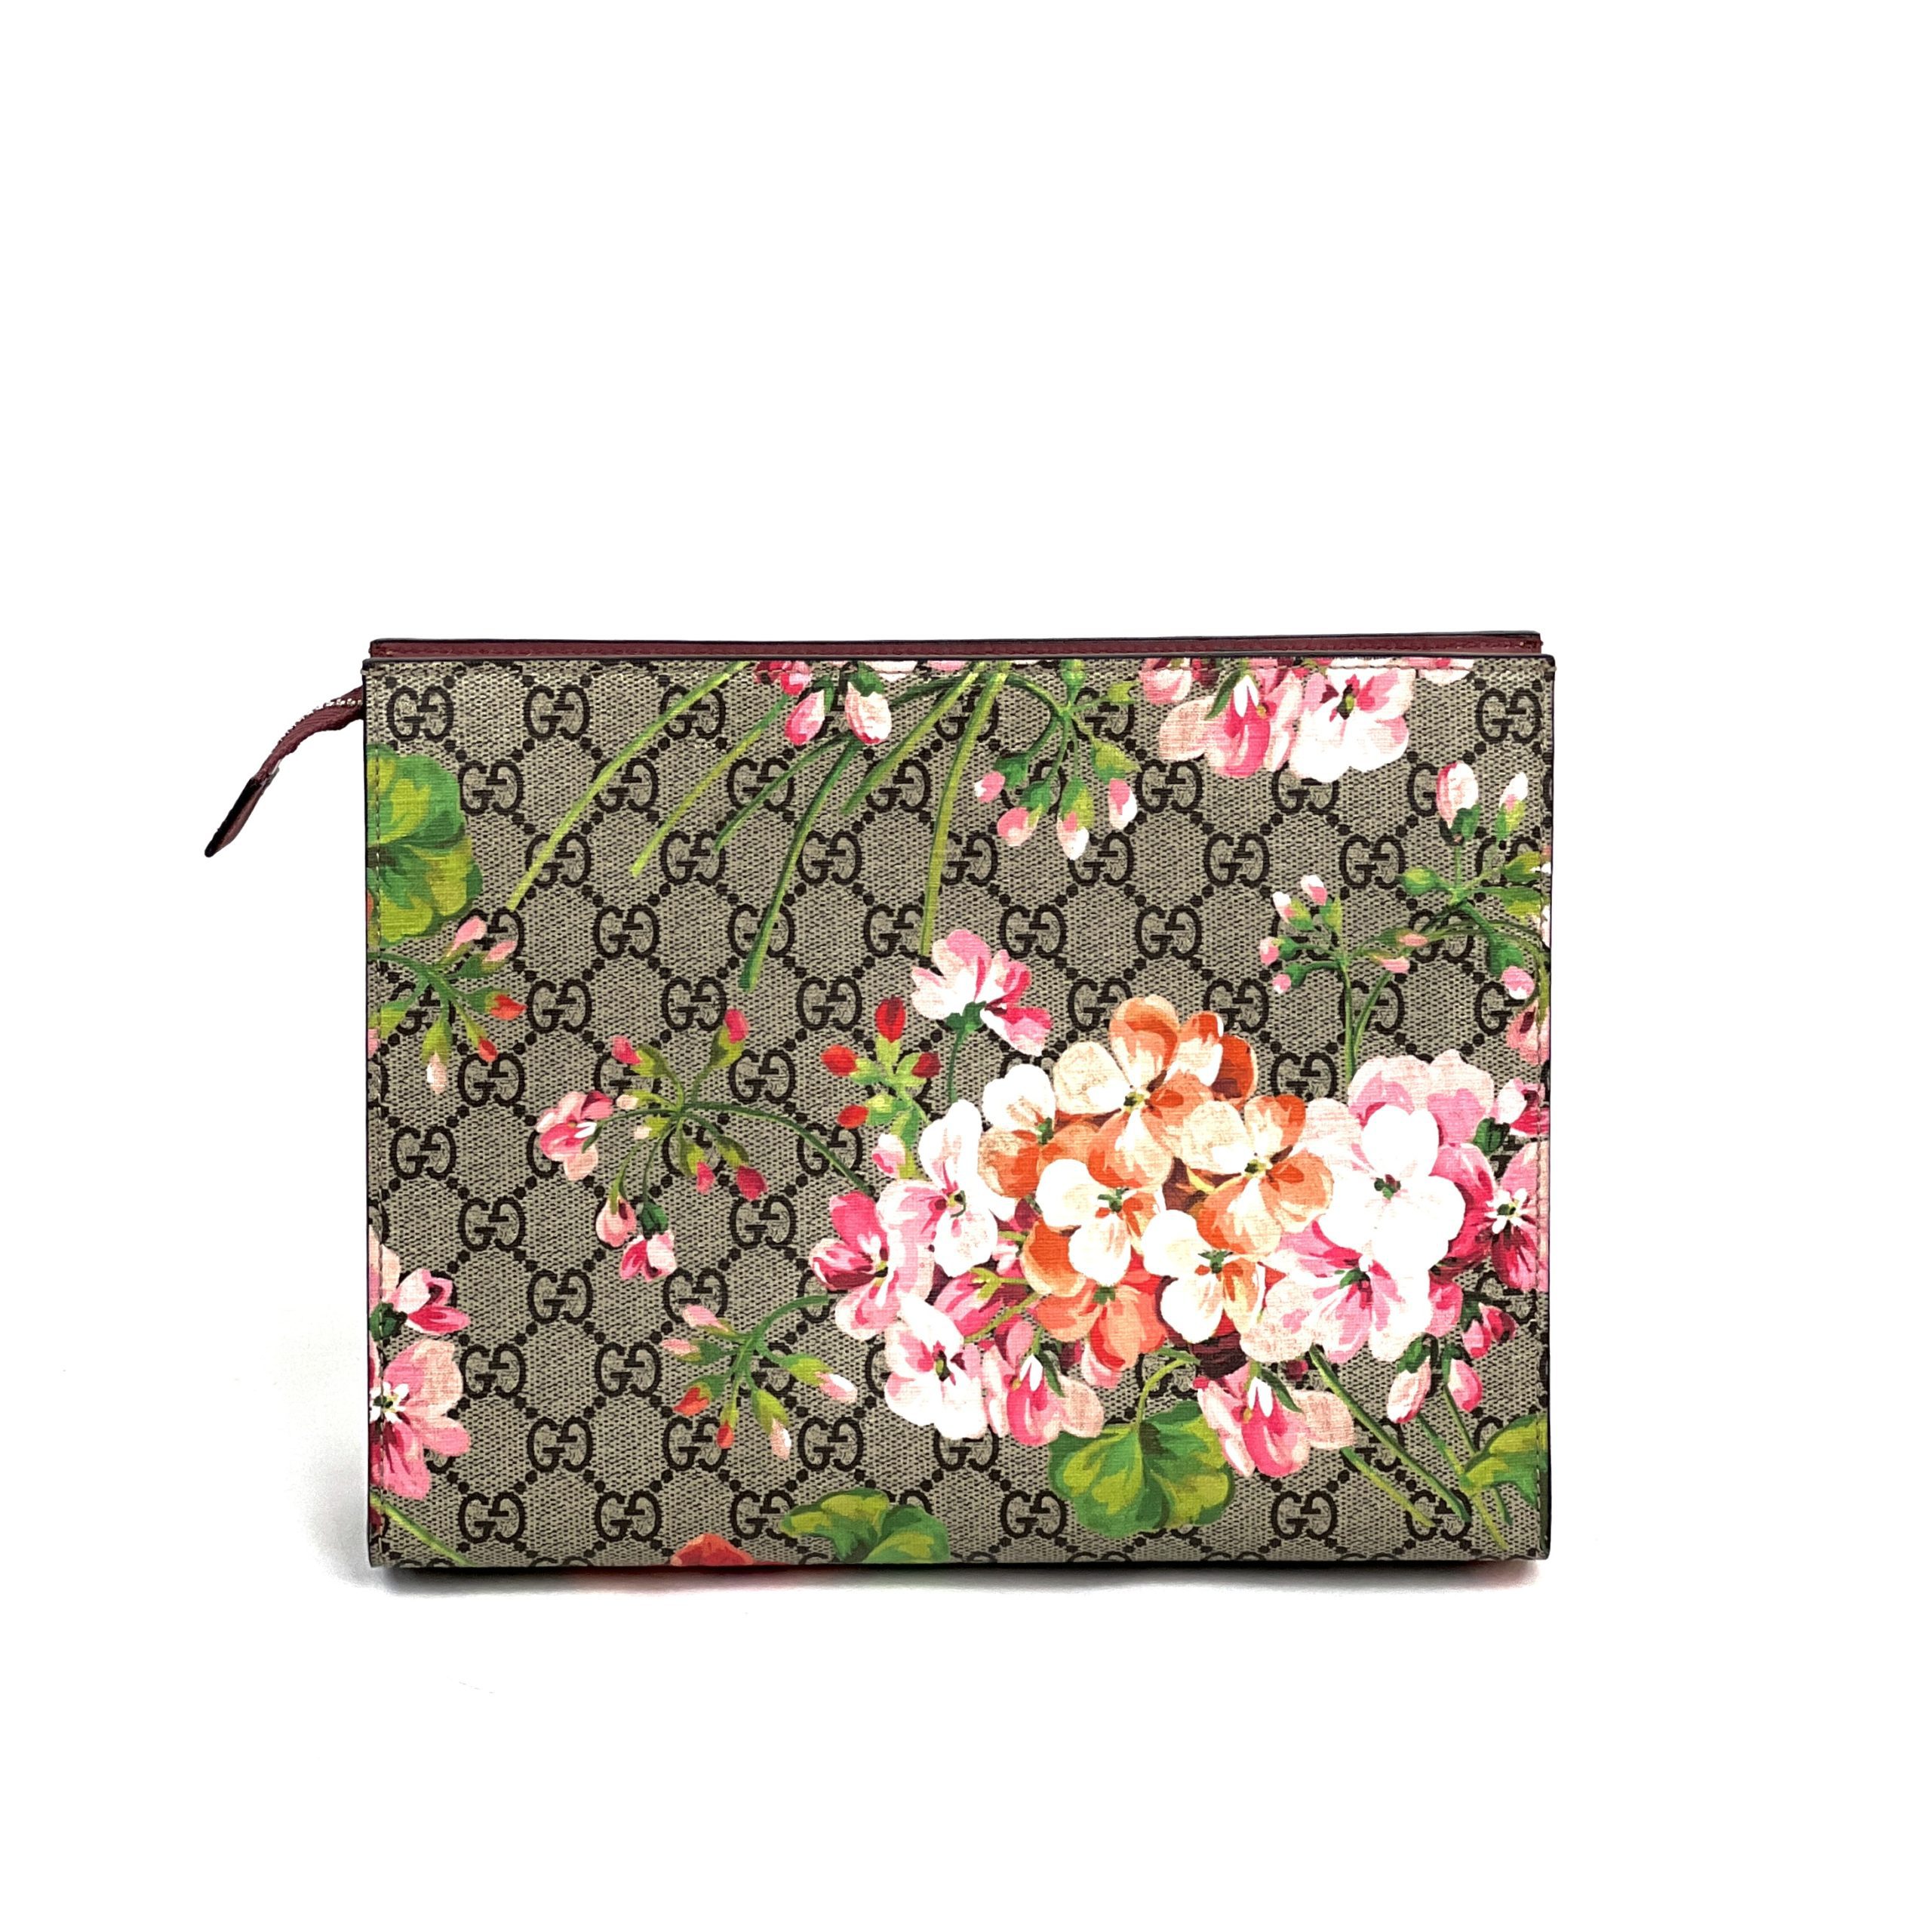 New Gucci Bloom Pouch Clutch Makeup Cosmetic Bag